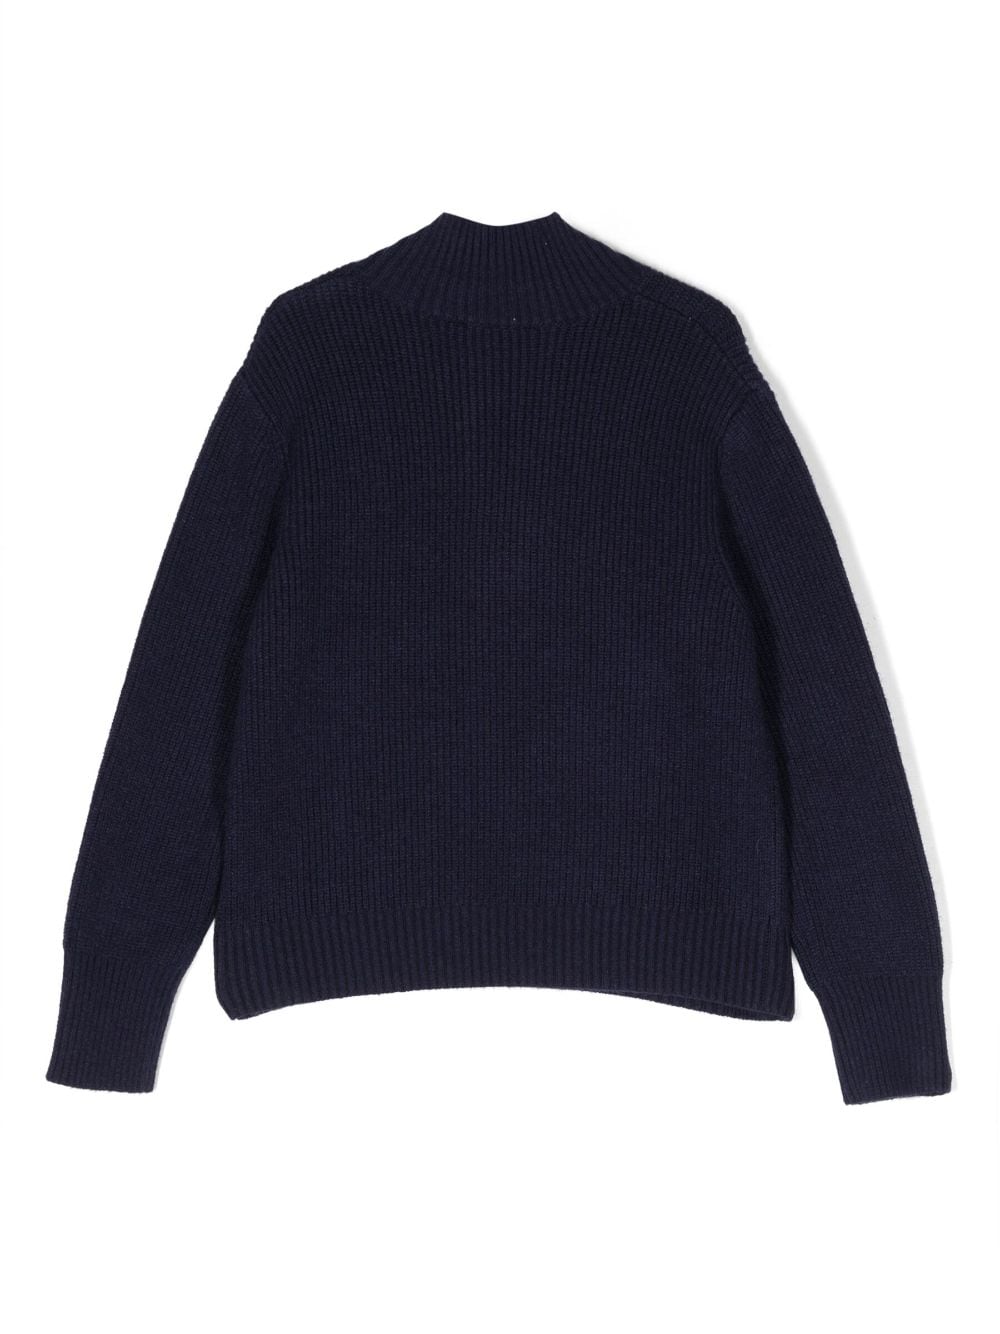 Image 2 of Marc Jacobs Kids button-placket knit top